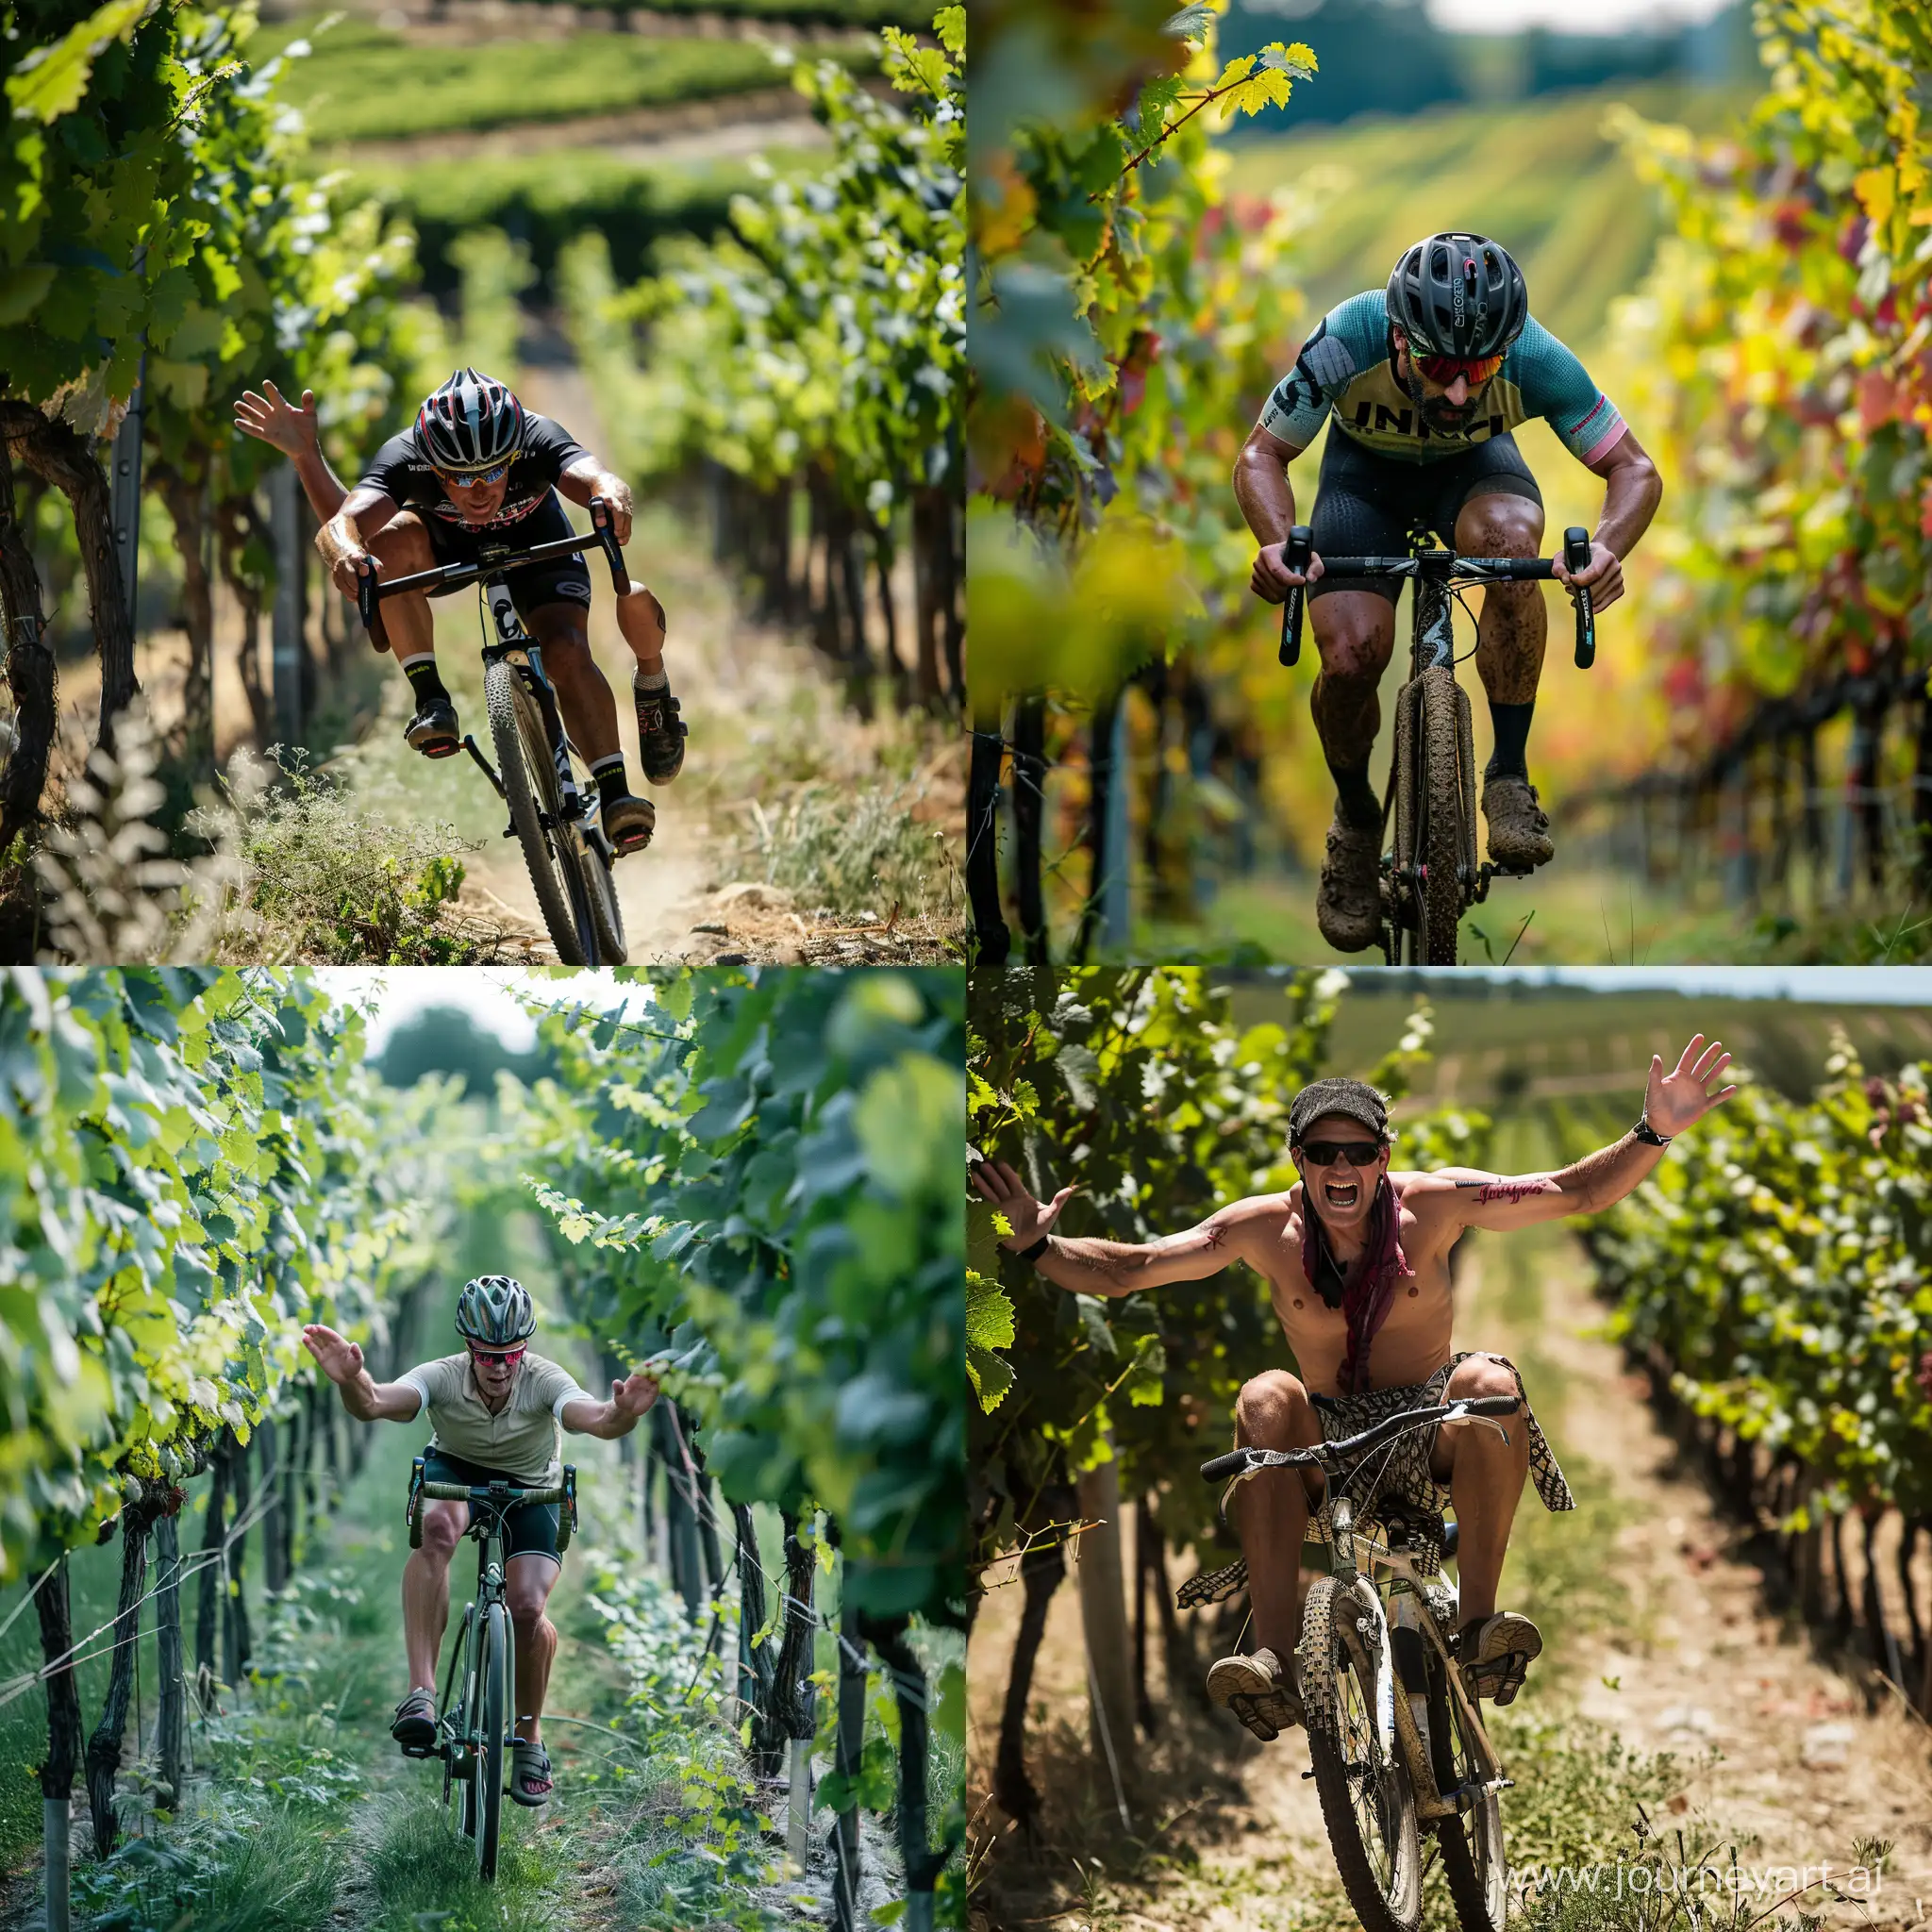 A cyclist rides through a vineyard without holding on to the handlebars, his hands and feet are up